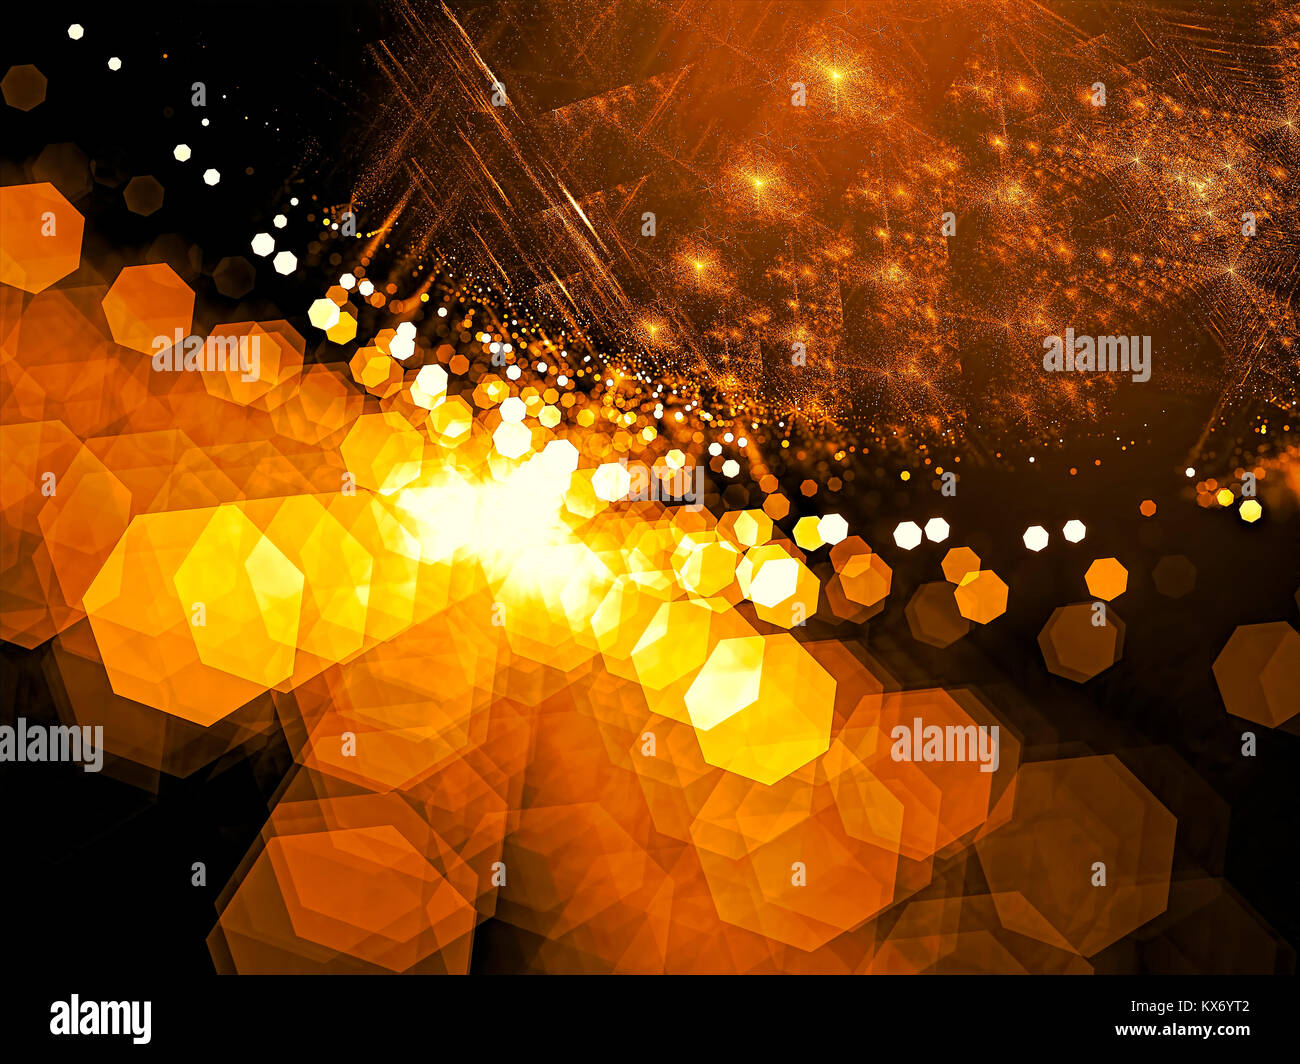 Blurred fractal background - abstract digitally generated image Stock Photo